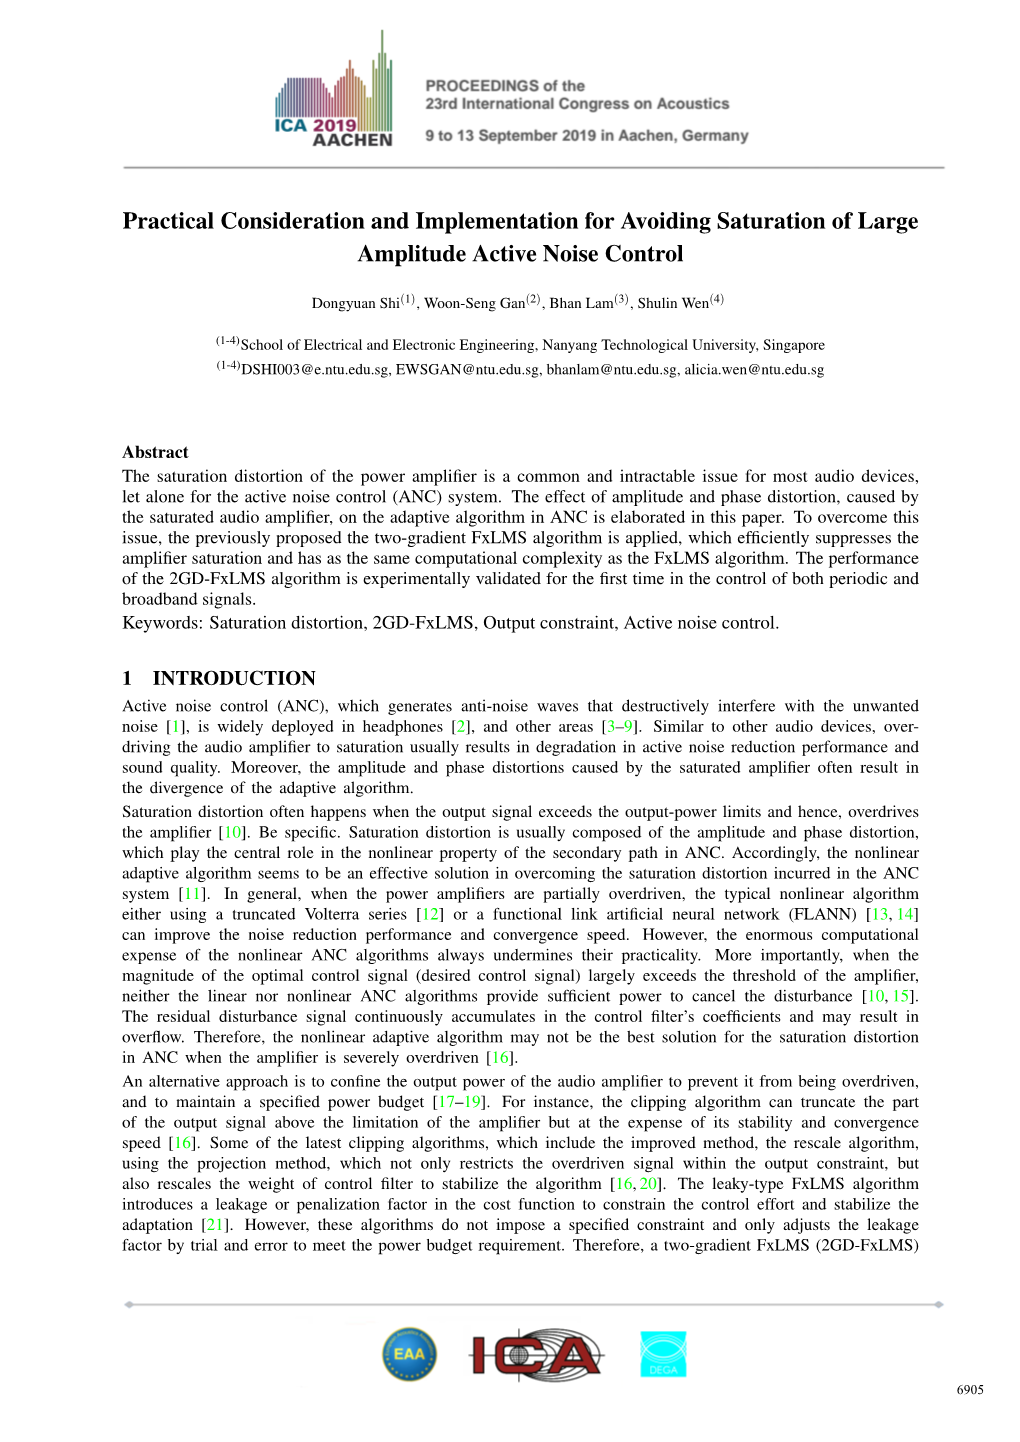 Practical Consideration and Implementation for Avoiding Saturation of Large Amplitude Active Noise Control